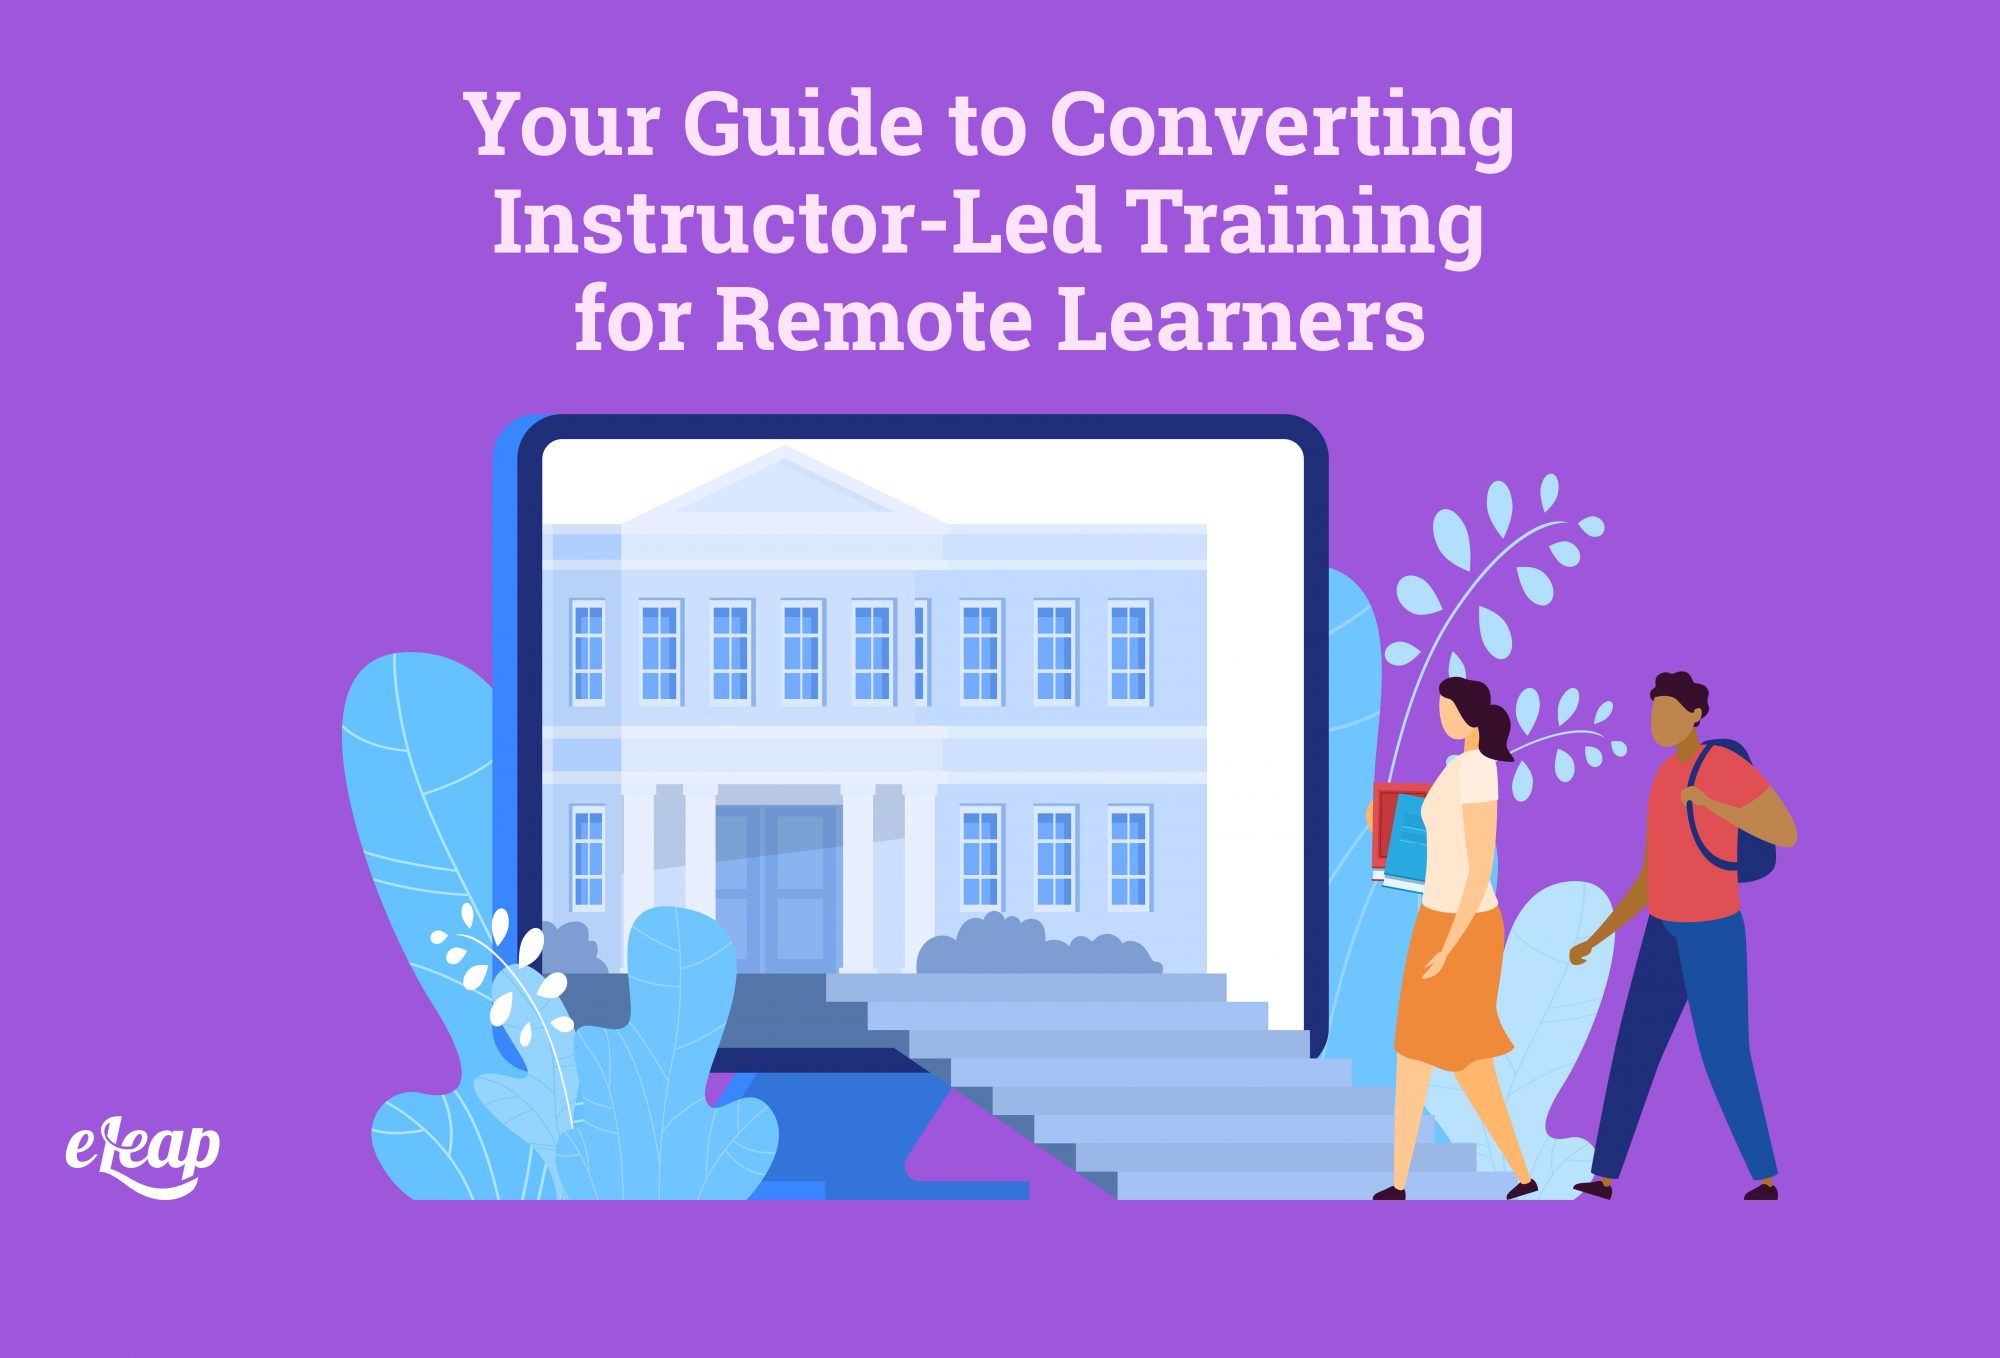 Your Guide to Converting Instructor-Led Training for Remote Learners